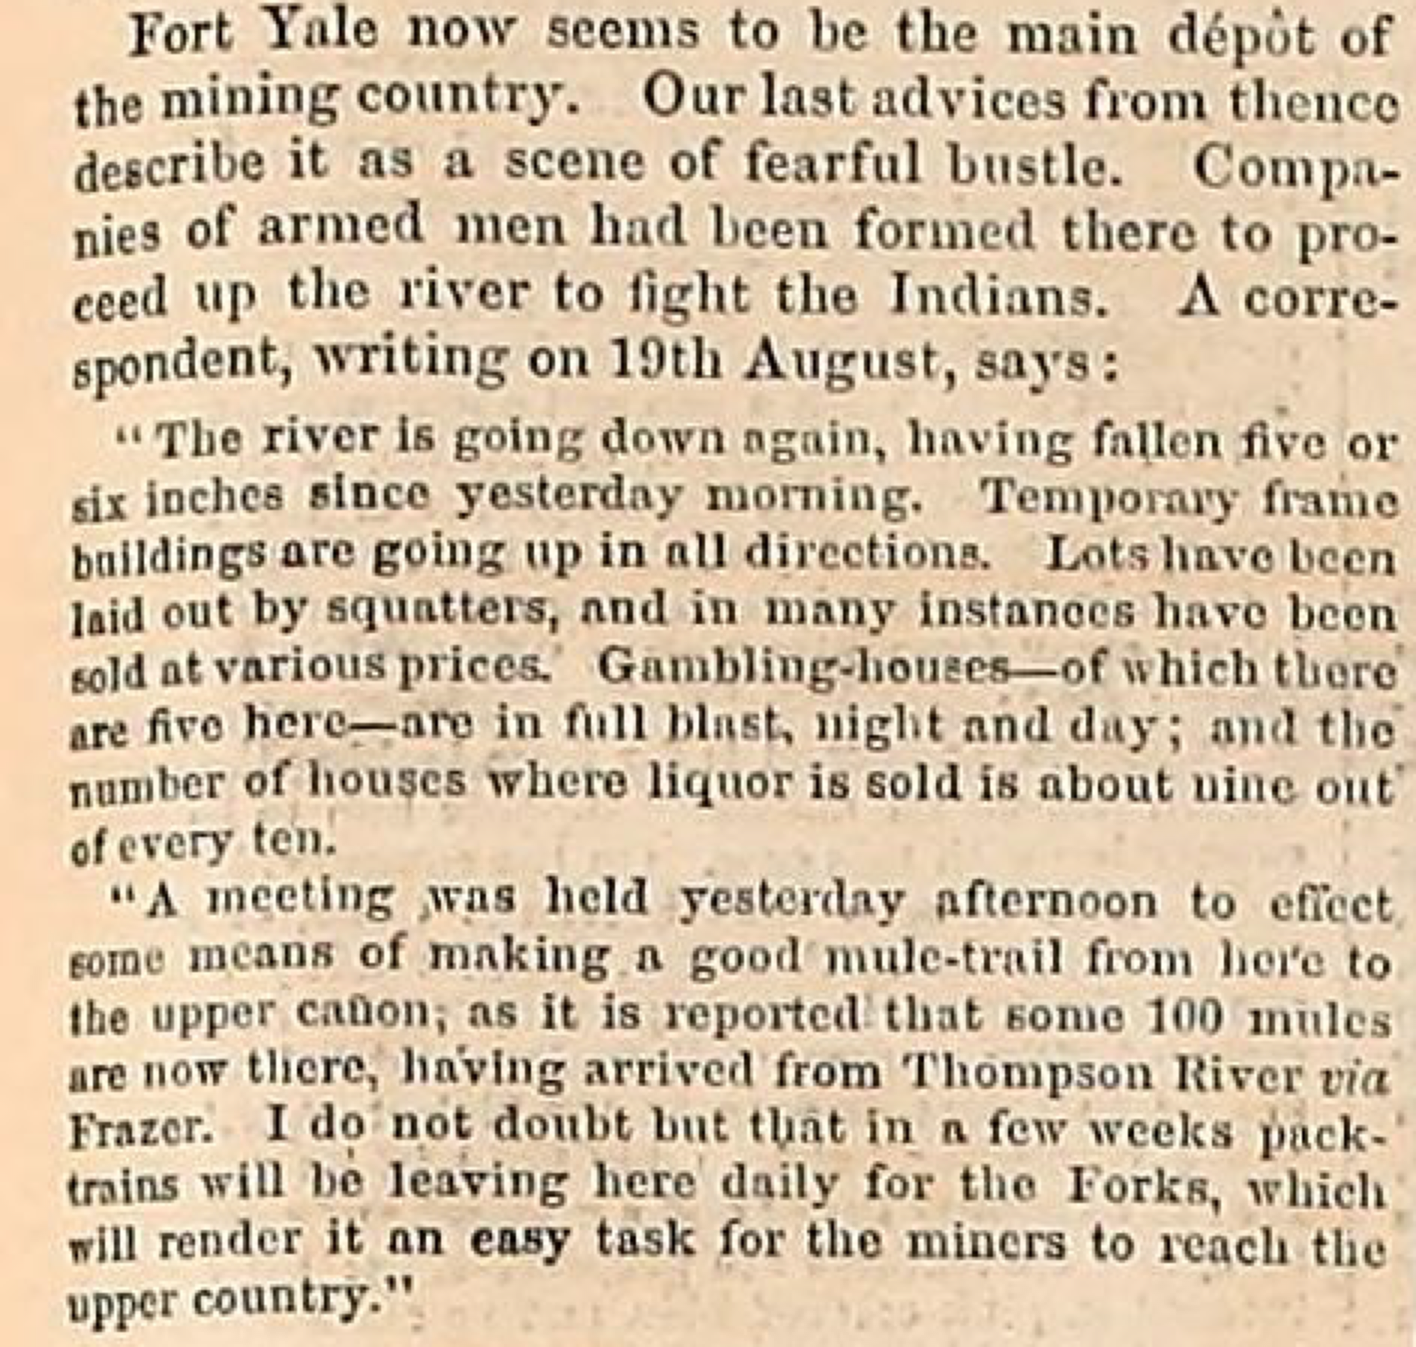 Account of armed men at Fort Yale going up Fraser River